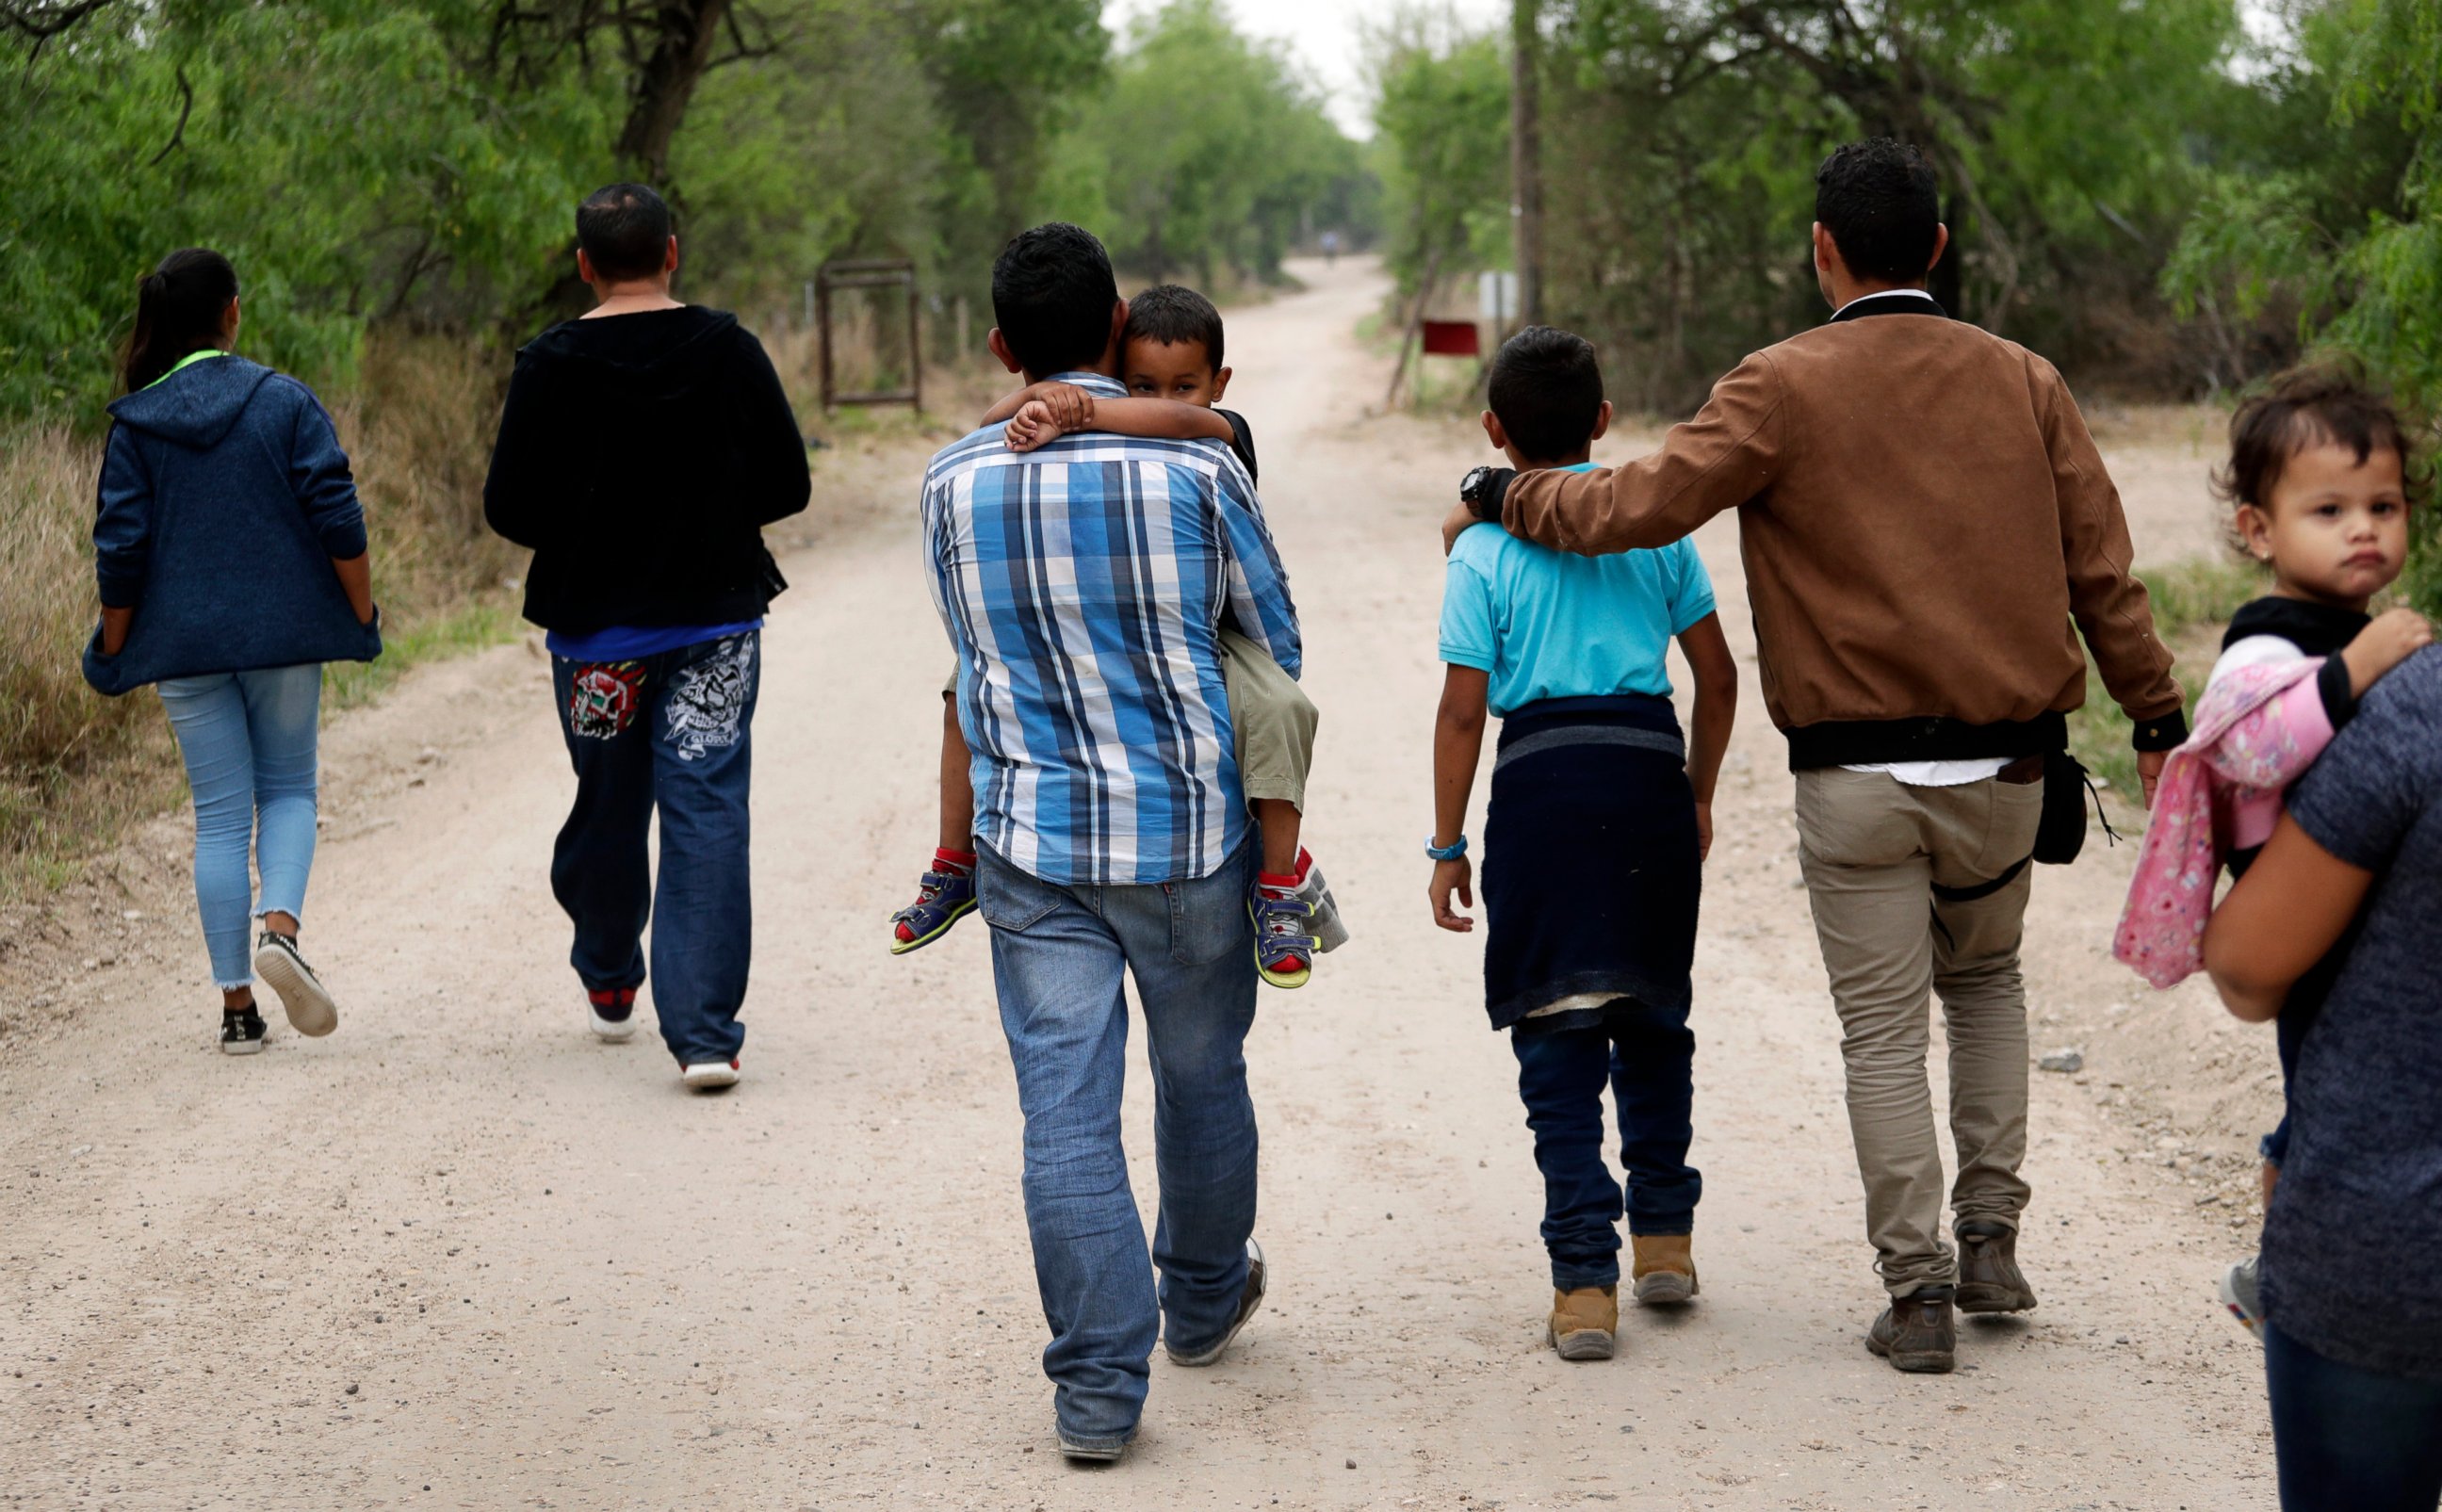 PHOTO: In this March 14, 2019, file photo, a group of migrant families walk from the Rio Grande, the river separating the U.S. and Mexico in Texas, near McAllen, Texas, right before being apprehended by Border Patrol.